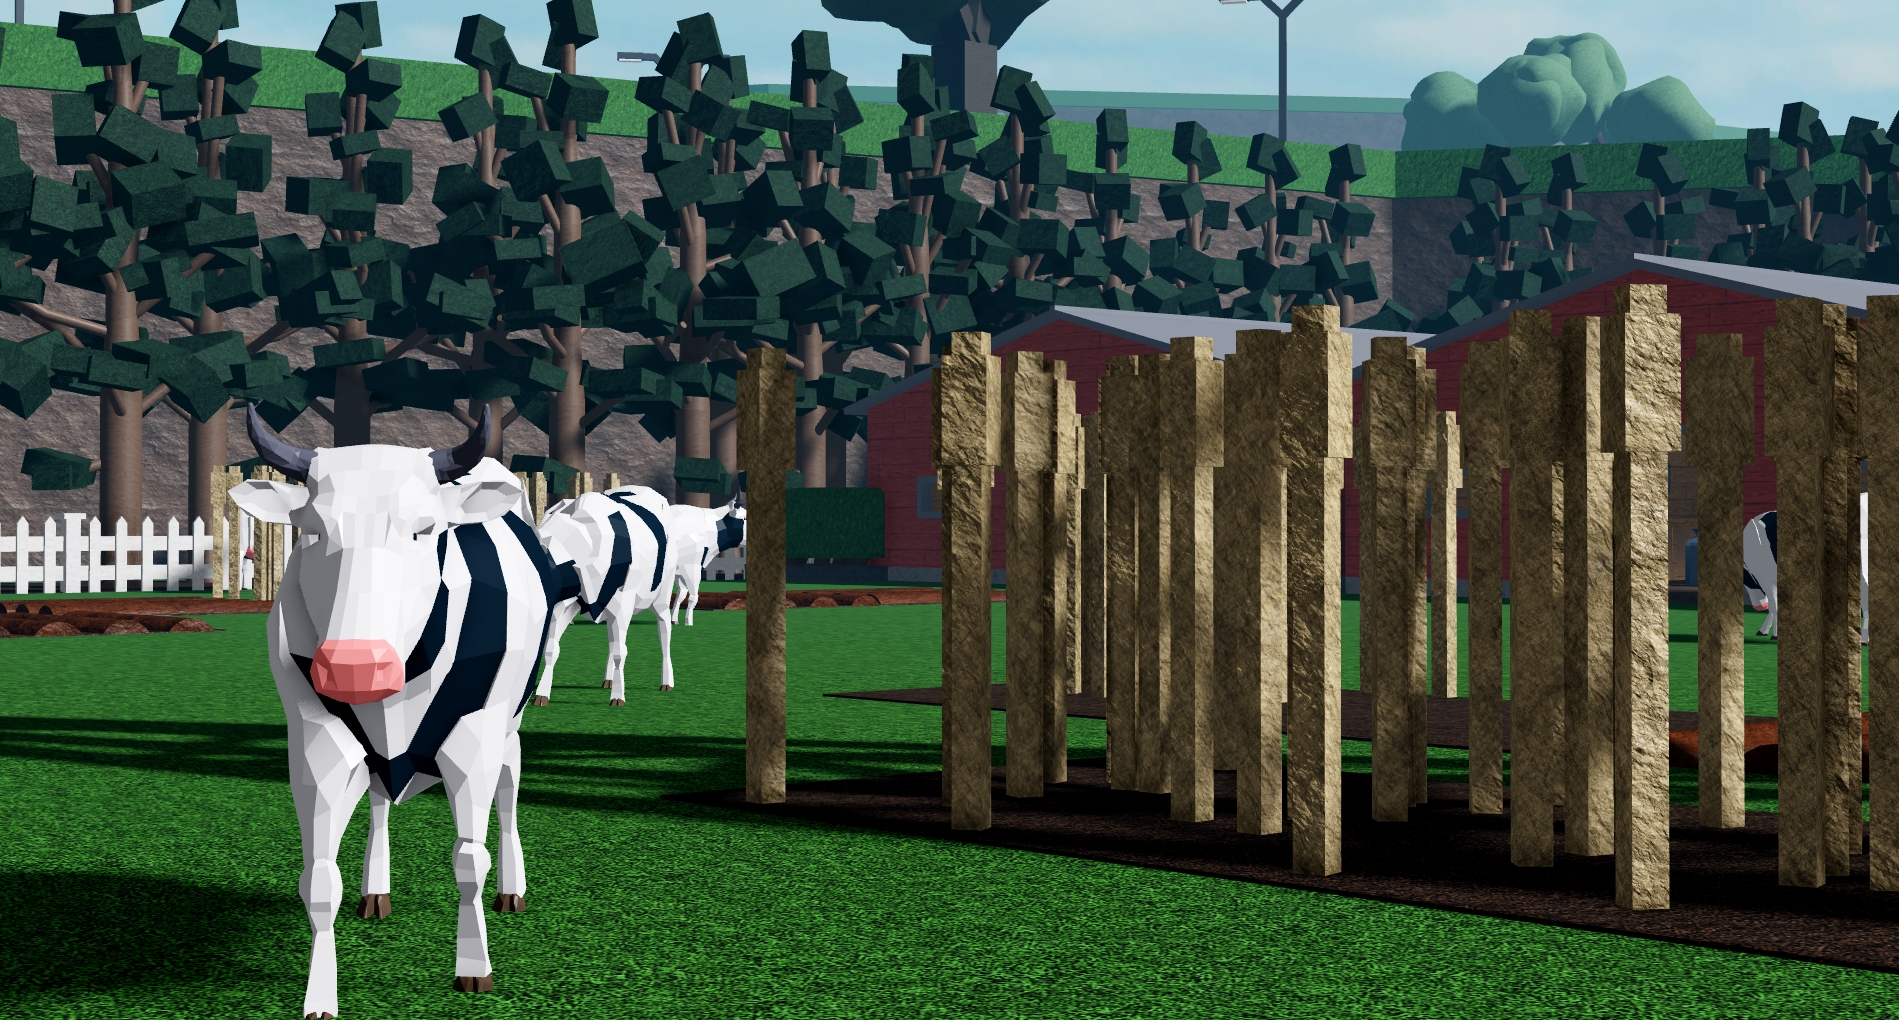 Farming and Friends - Roblox